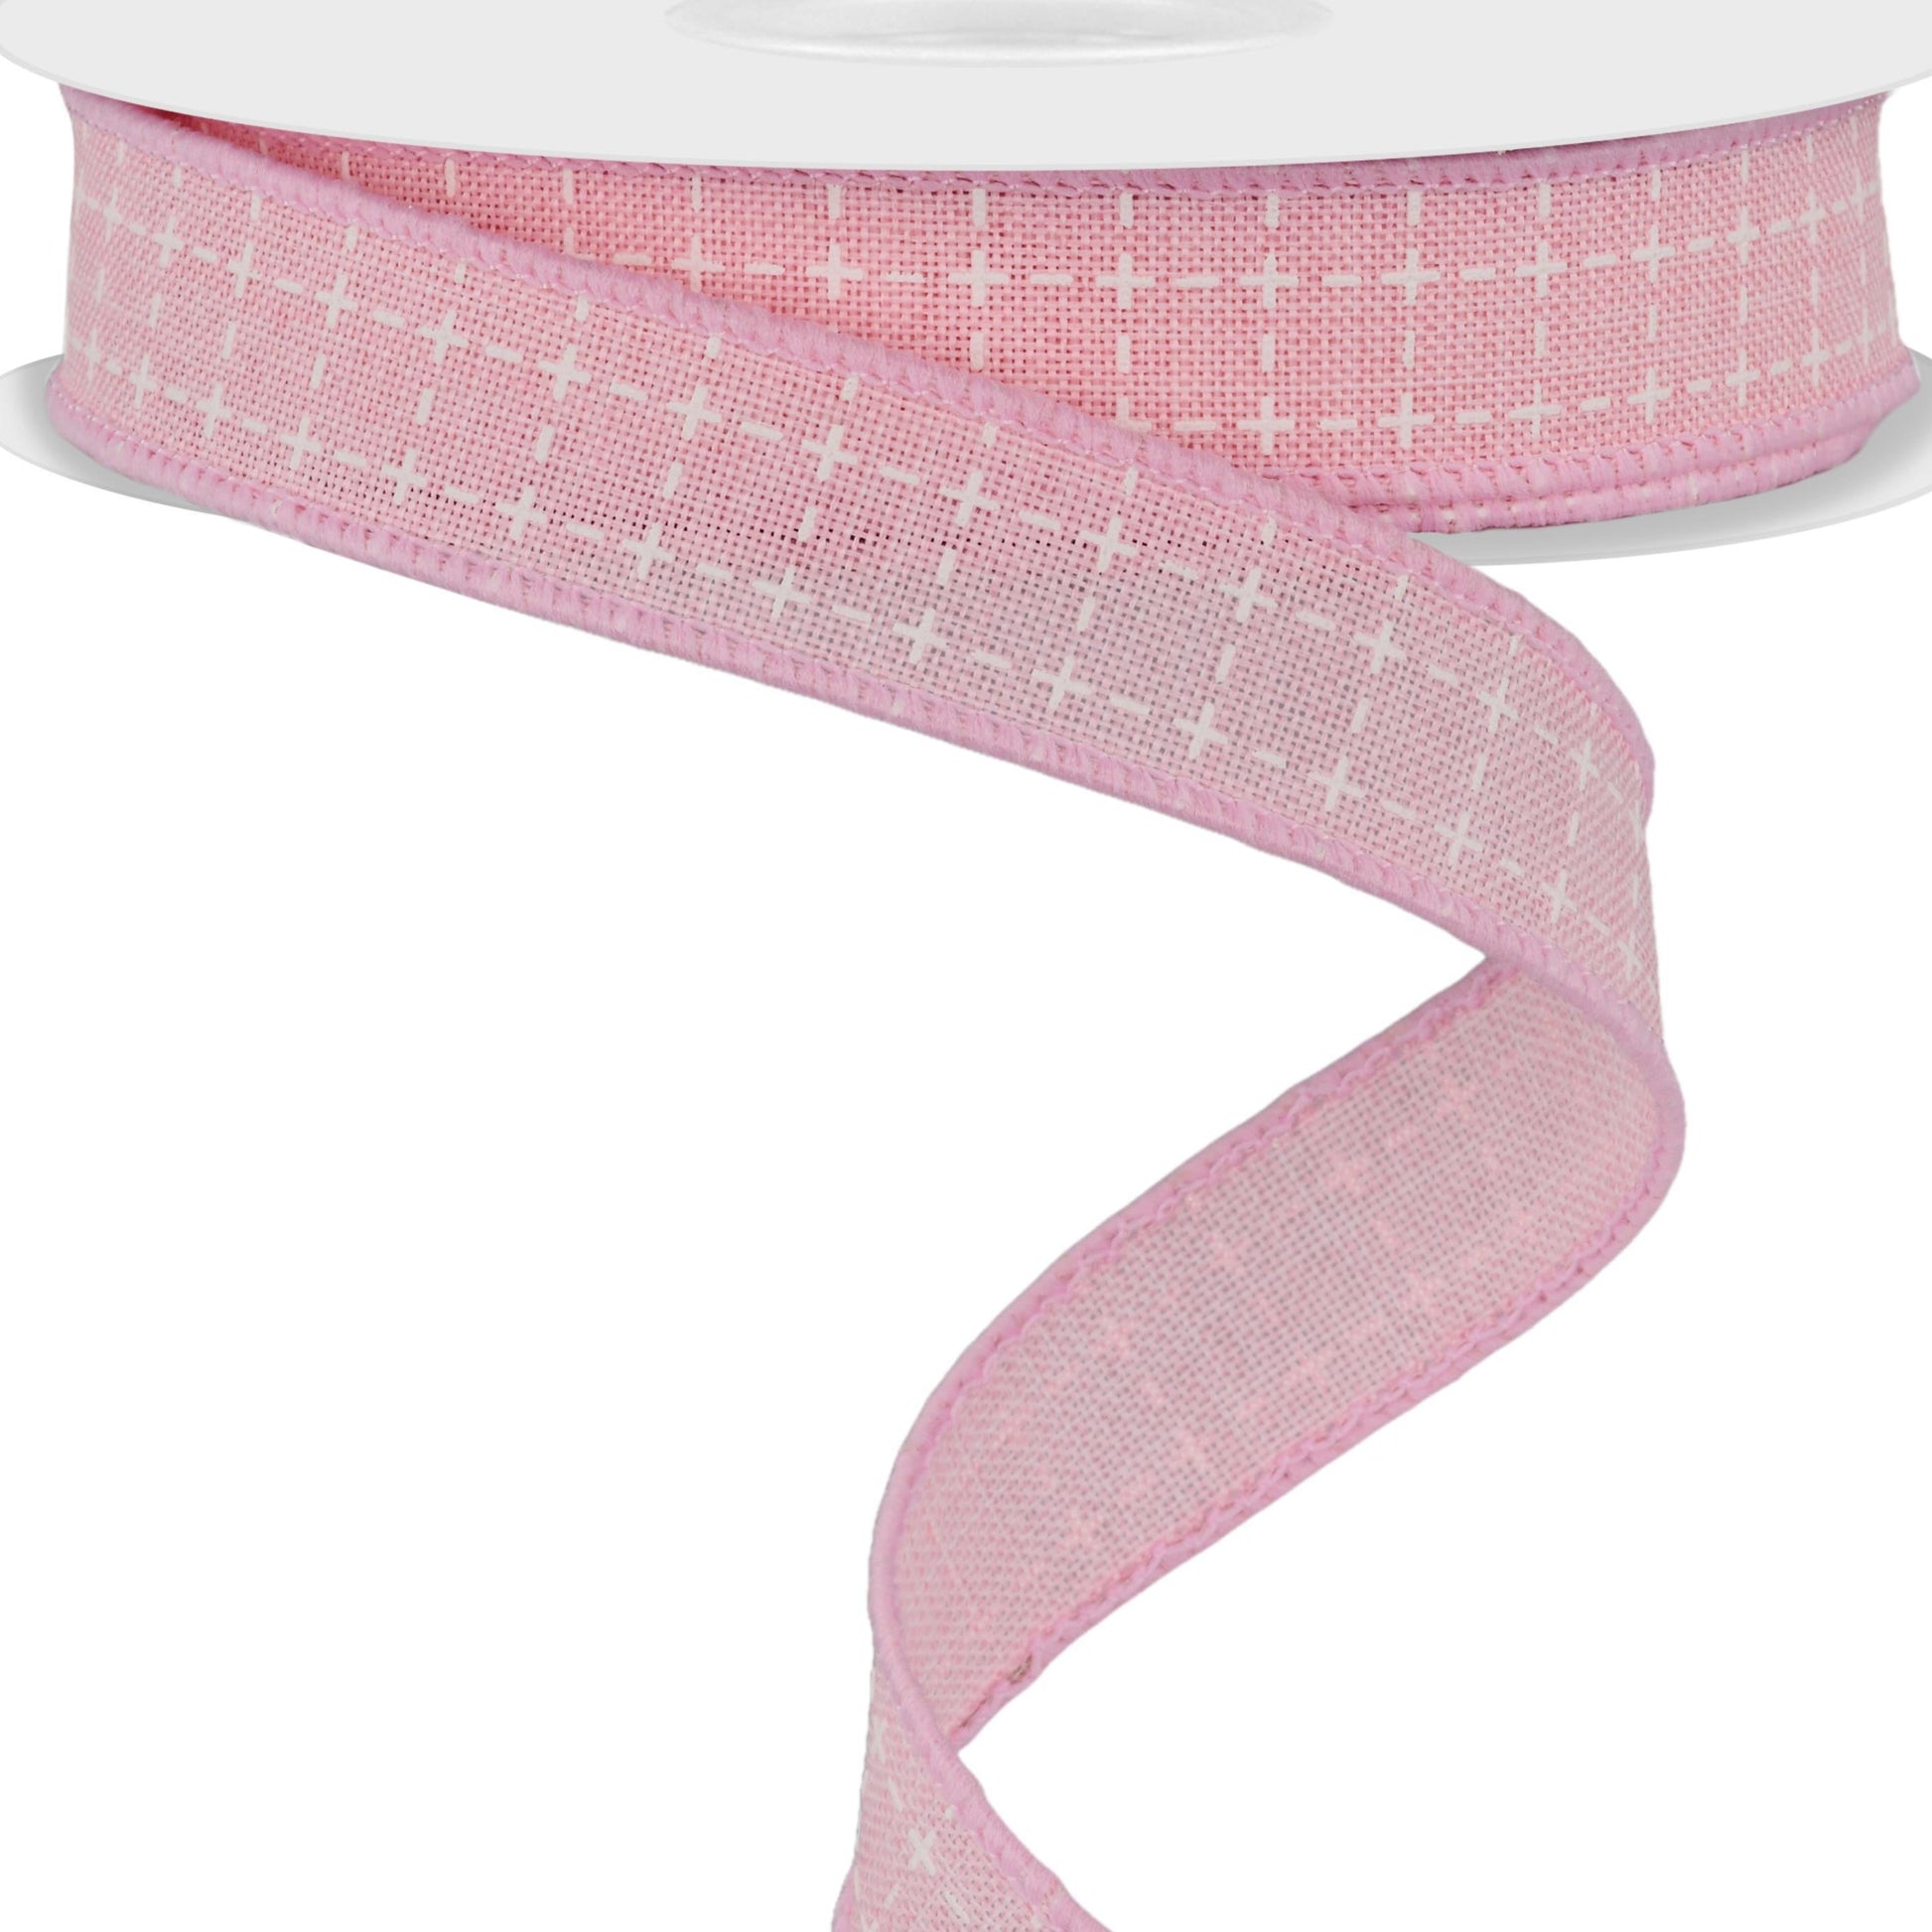 Wired Ribbon * Raised Stitch * Lt. Pink and White Canvas * 5/8 x